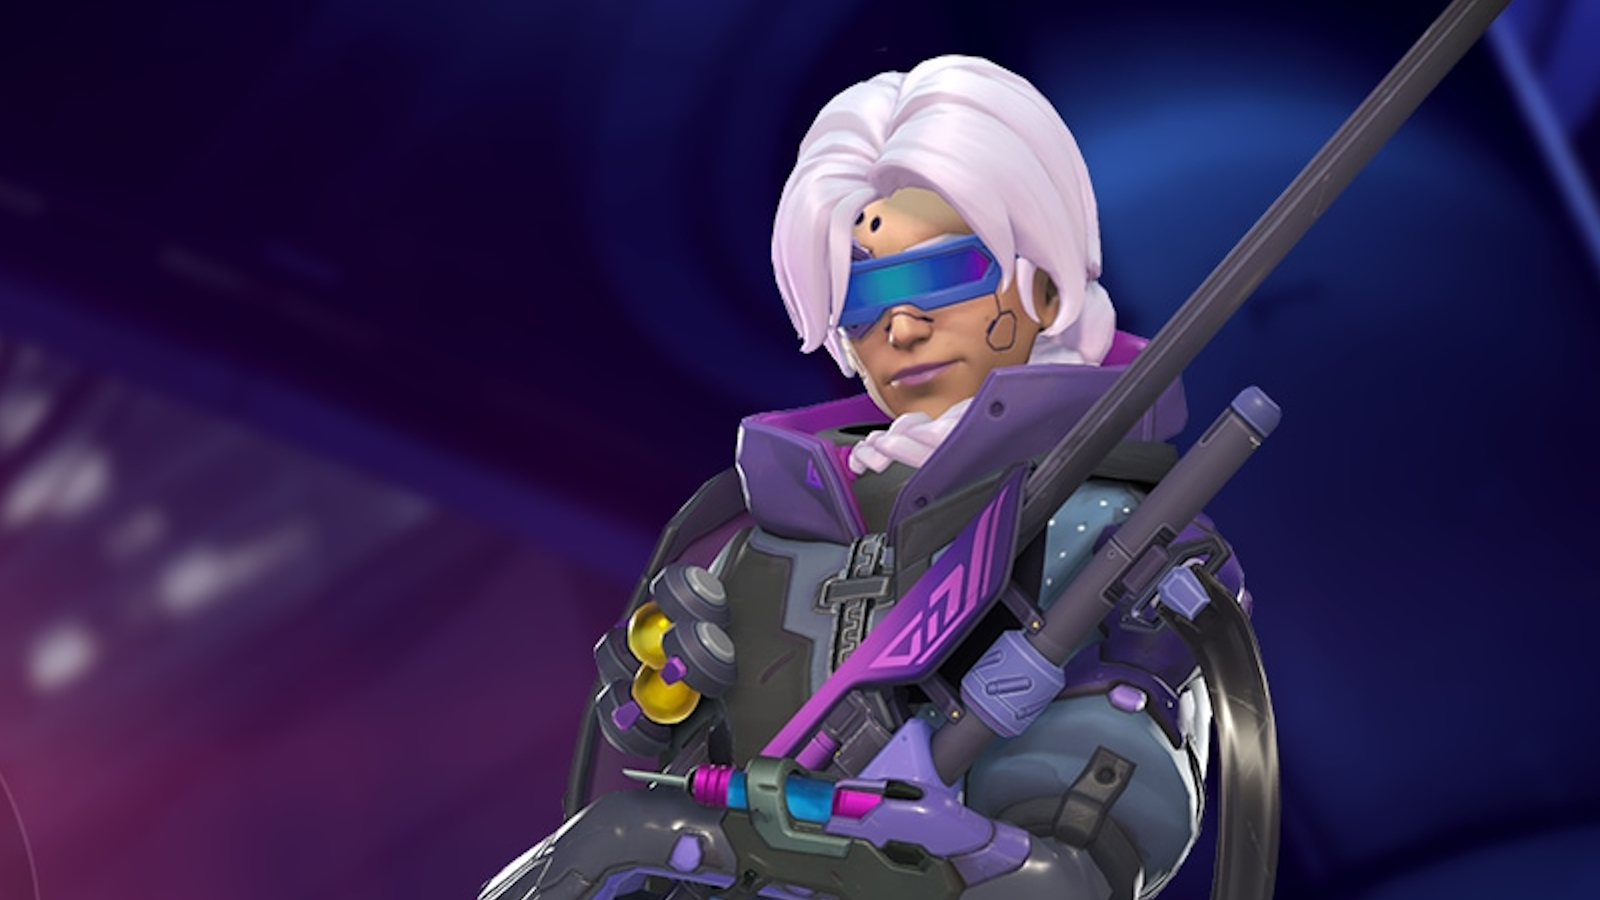 Overwatch Shop Adds a Fifth New Virtual Currency in Form of Faustian Bargain